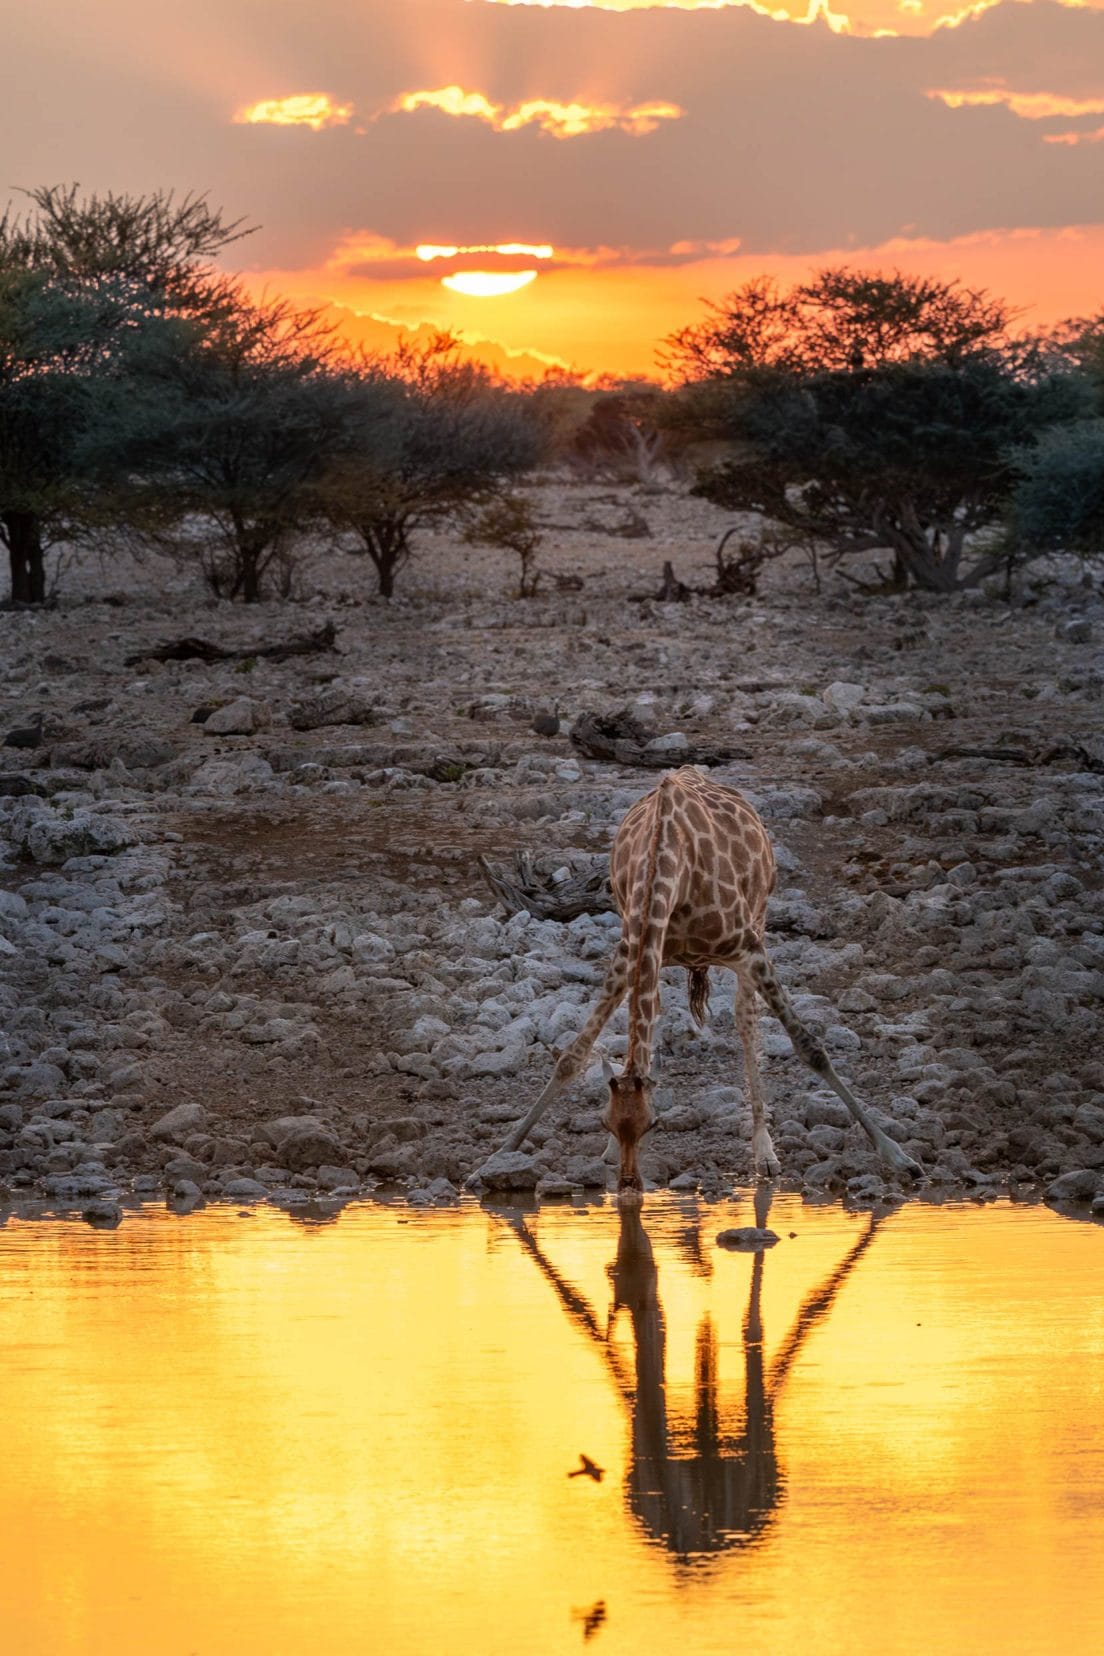 giraffe drinking at a waterhole with the setting sun behind